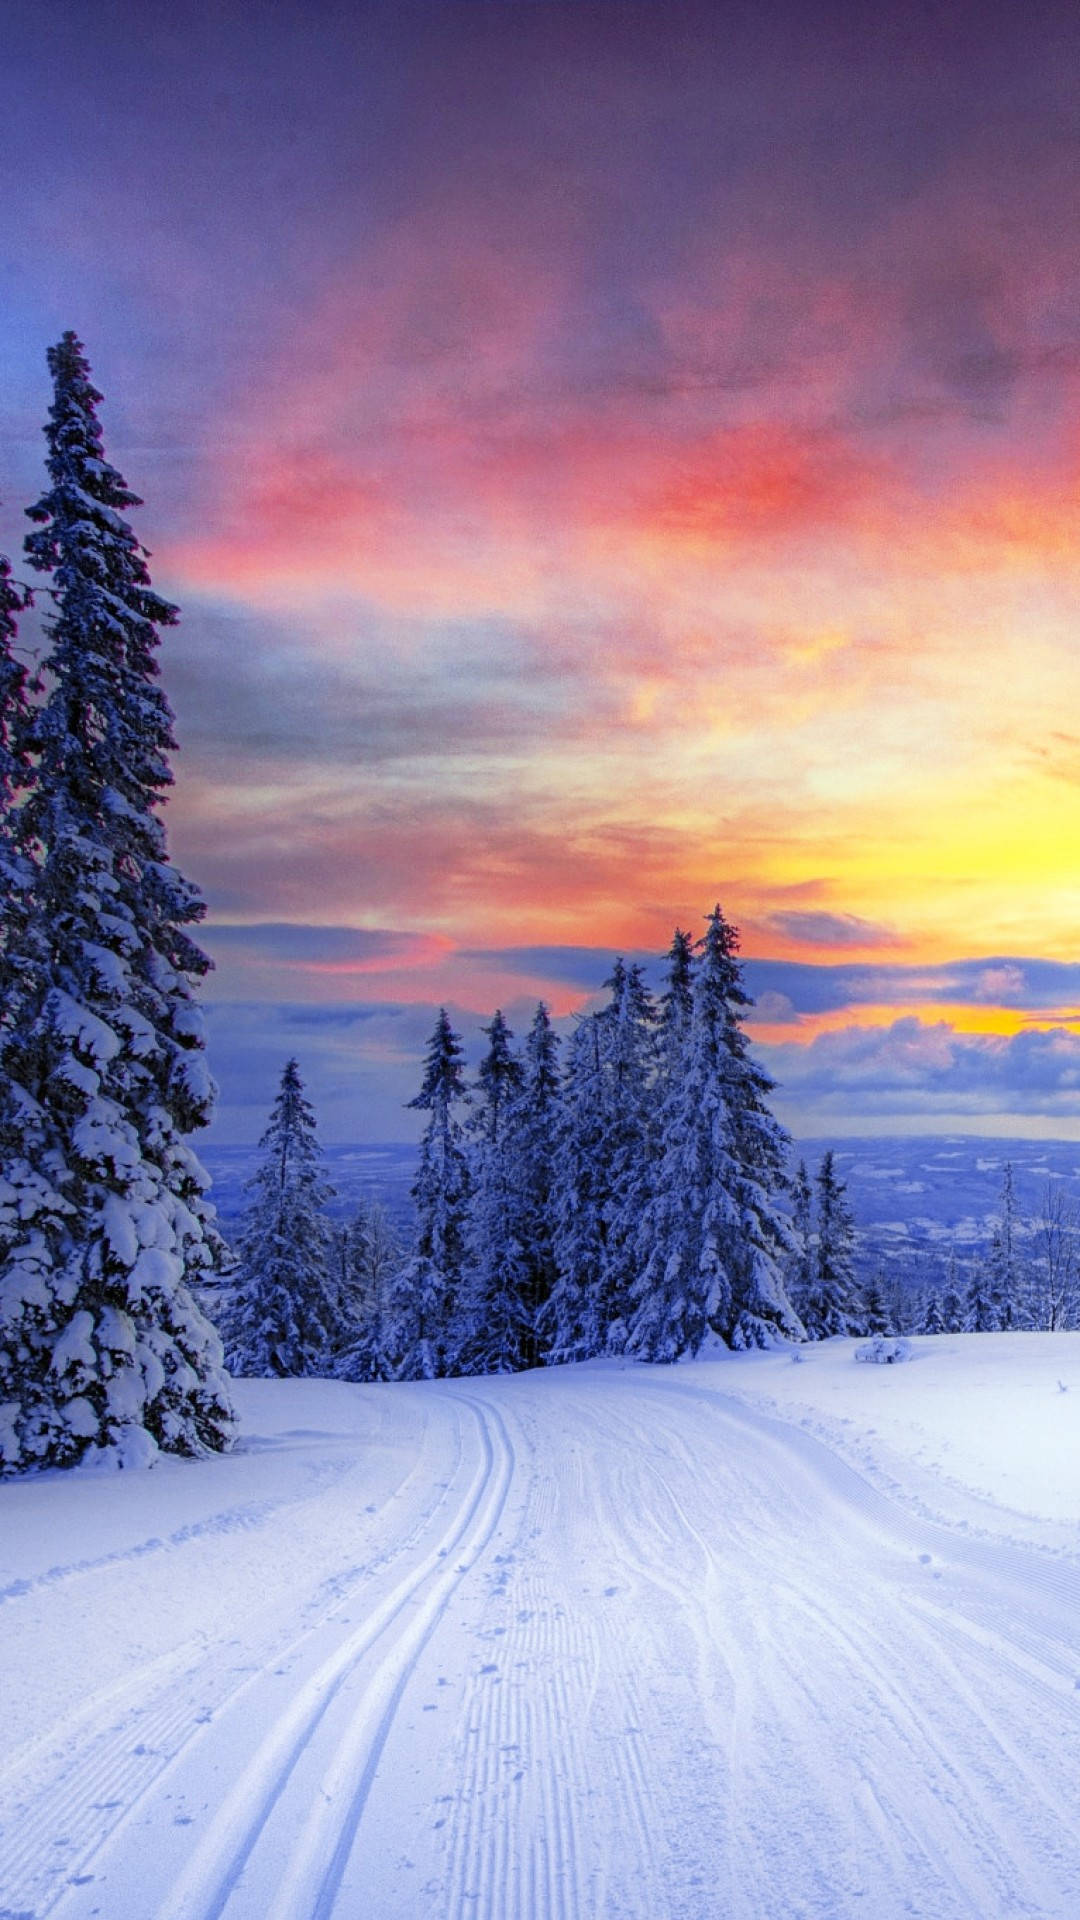 Free Winter Iphone Wallpaper Downloads, [100+] Winter Iphone Wallpapers for  FREE 